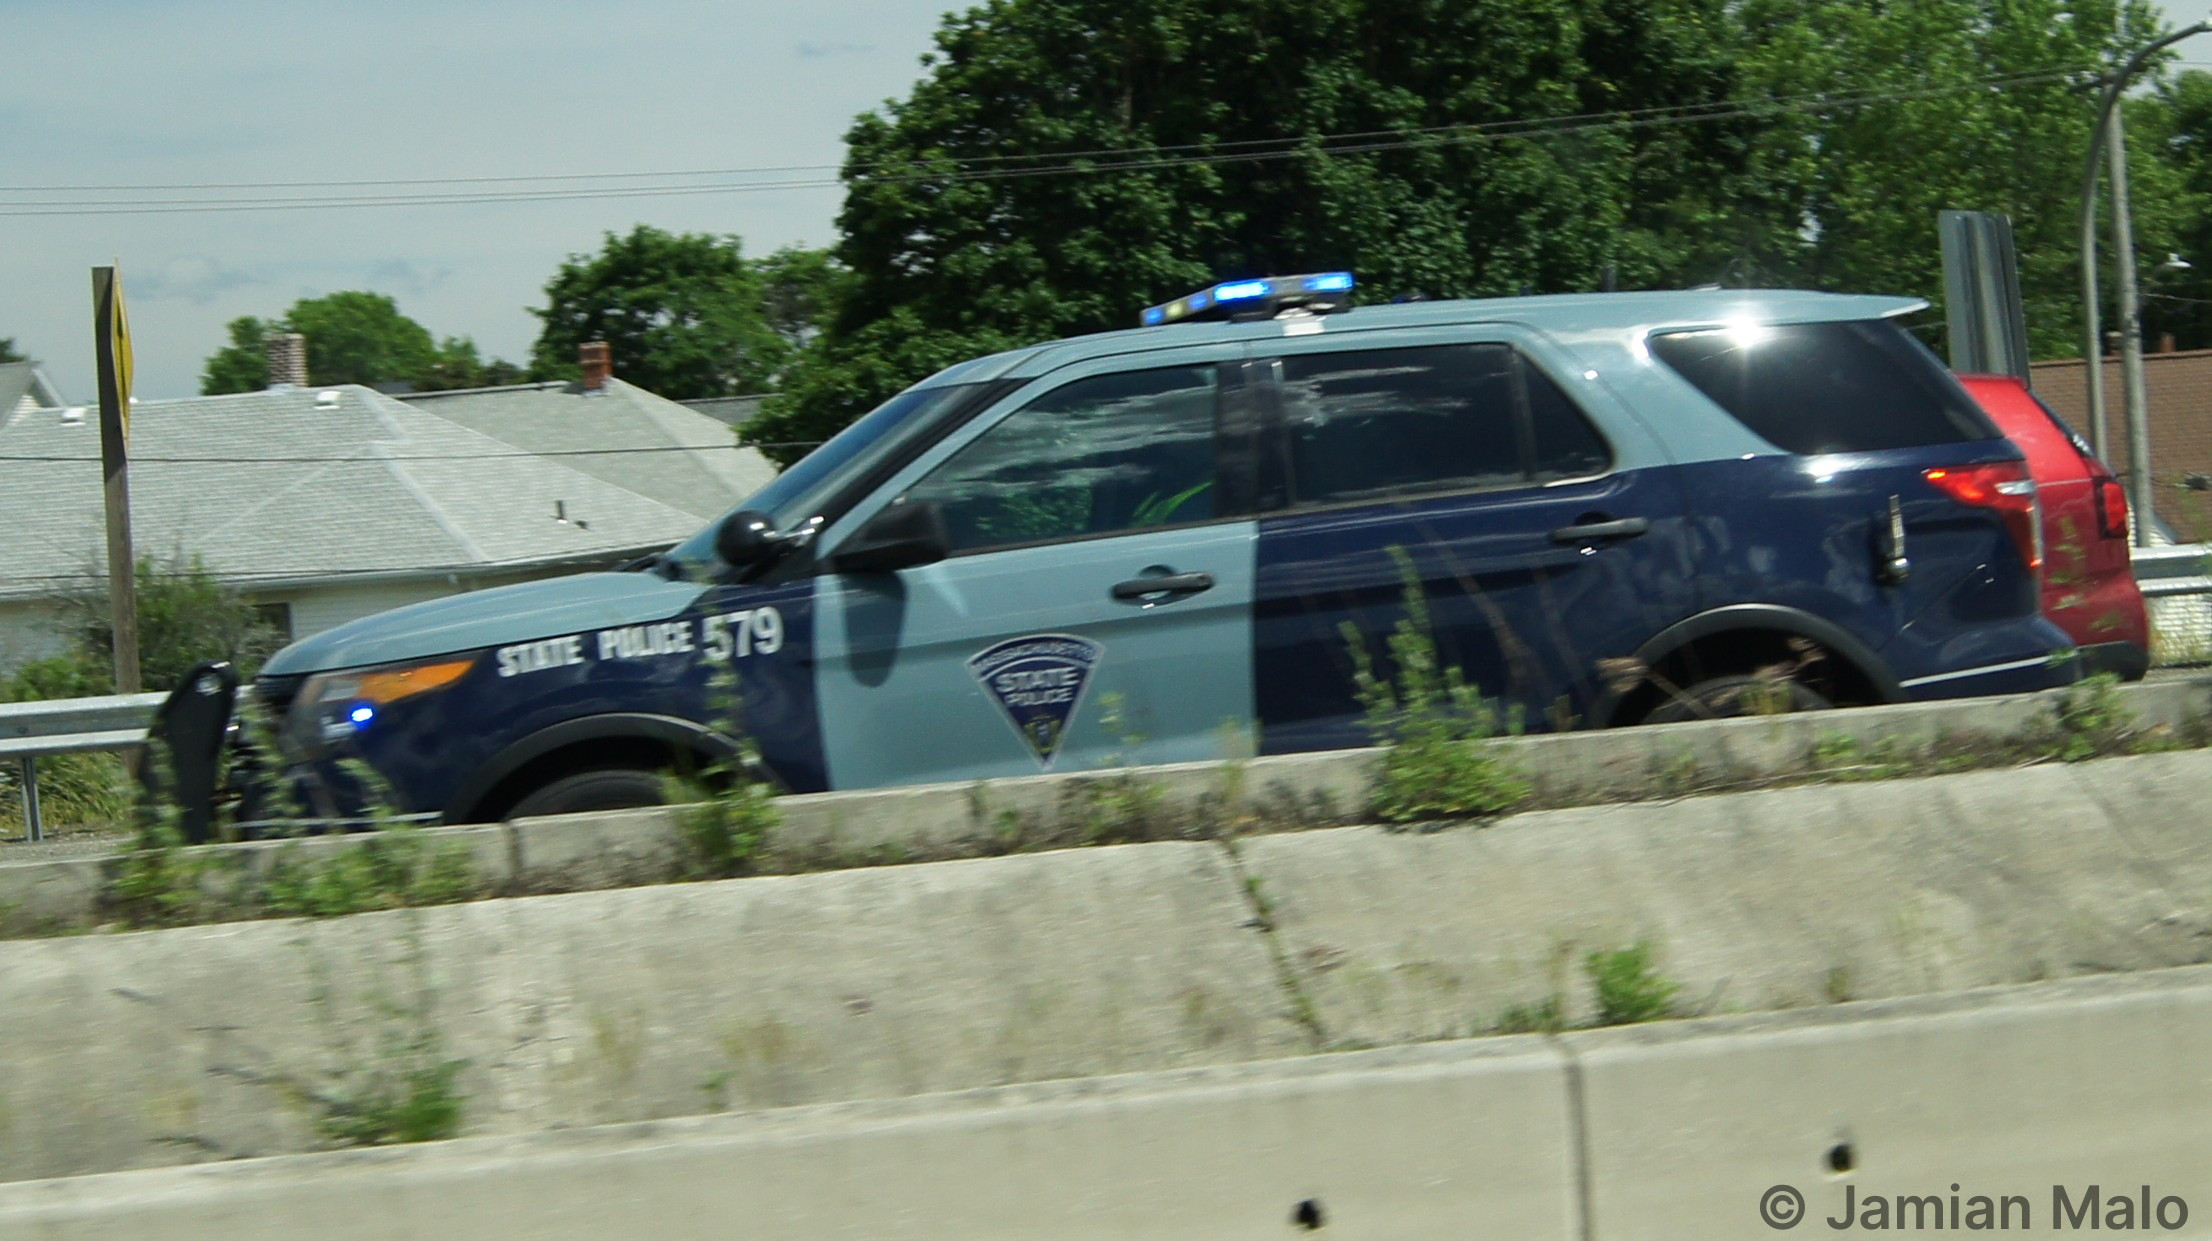 A photo  of Massachusetts State Police
            Cruiser 579, a 2013-2014 Ford Police Interceptor Utility             taken by Jamian Malo